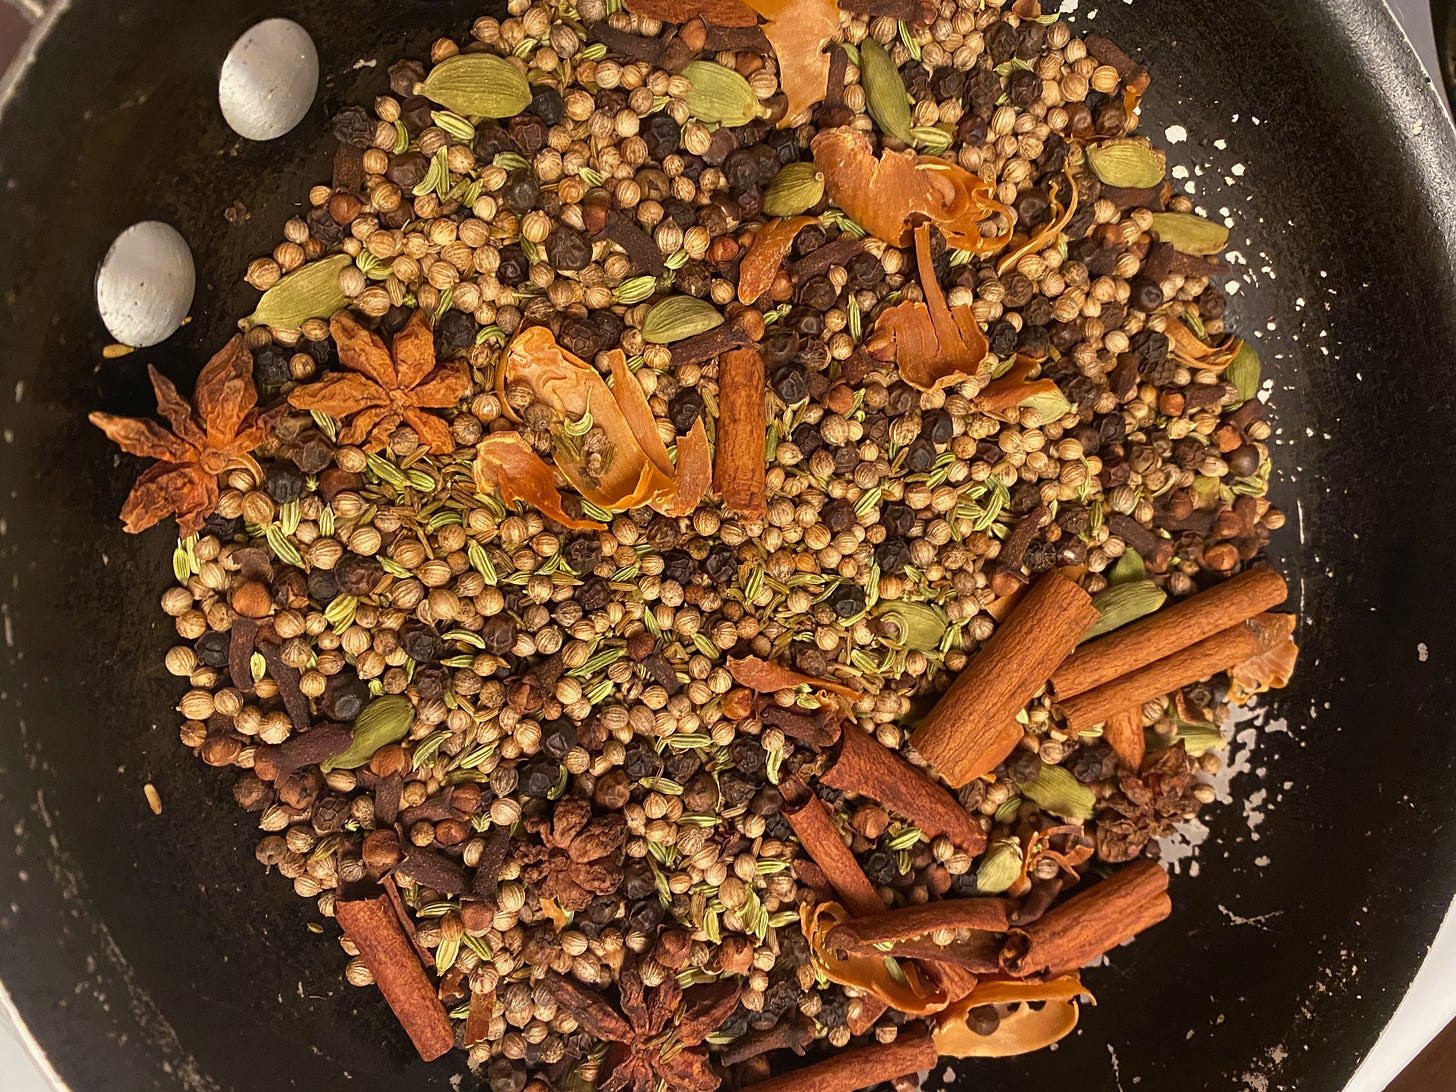 An array of whole spices in a small frying pan—green cardamon pods, star anise, broken cinnamon sticks, cumin, coriander, cloves, fennel, and mace.